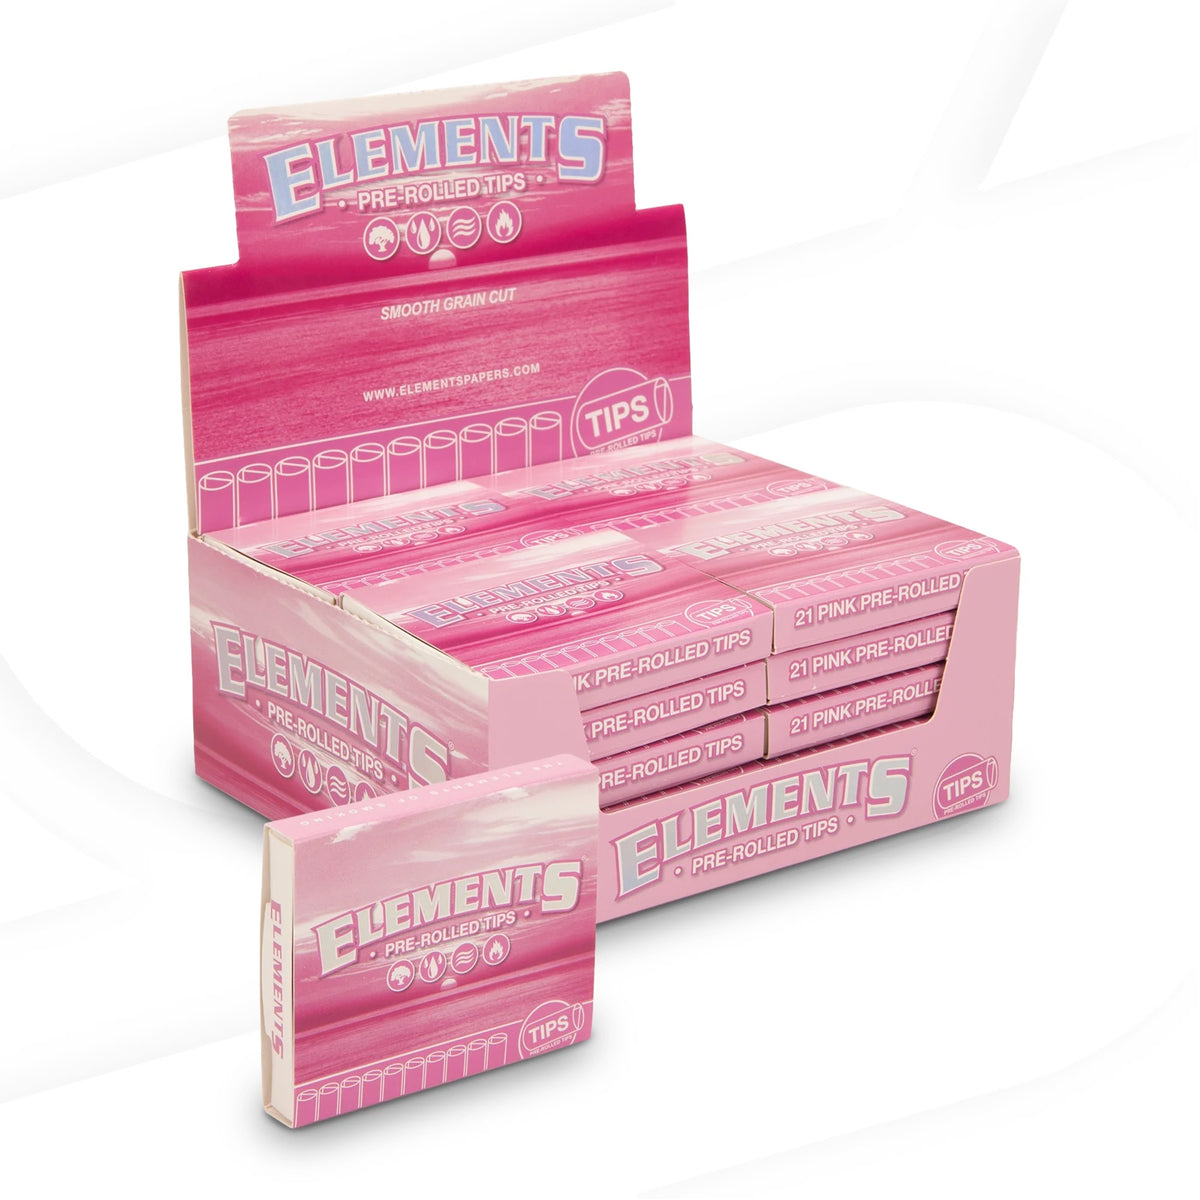 Elements Pre-Rolled Tips 20 Packs per box 21 tips per pack